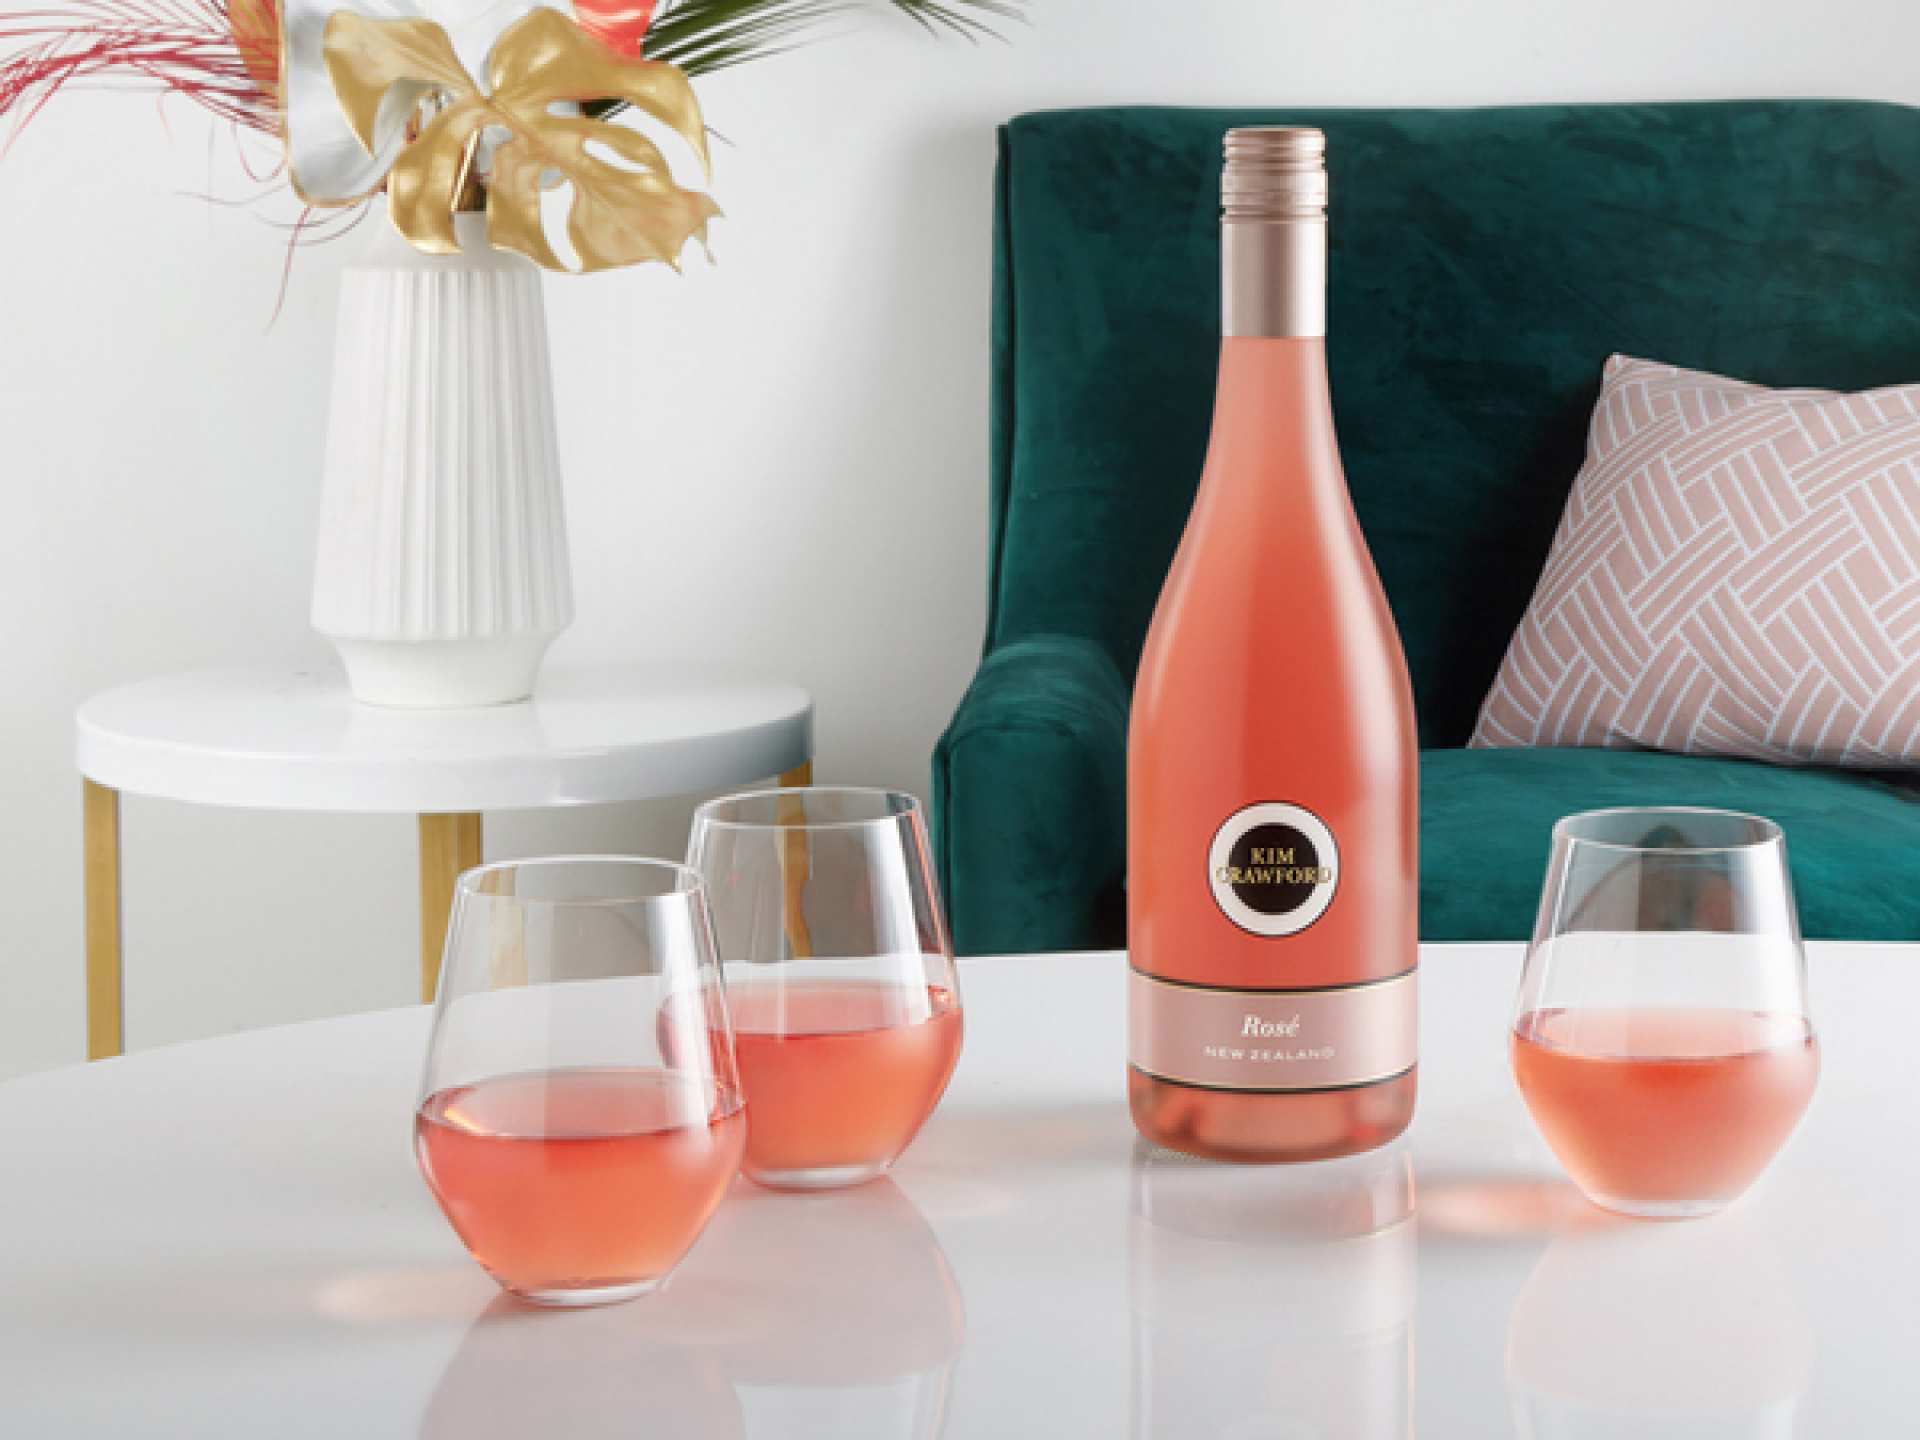 Summer drinks | A bottle of Kim Crawford Rosé with two glasses on the living room table